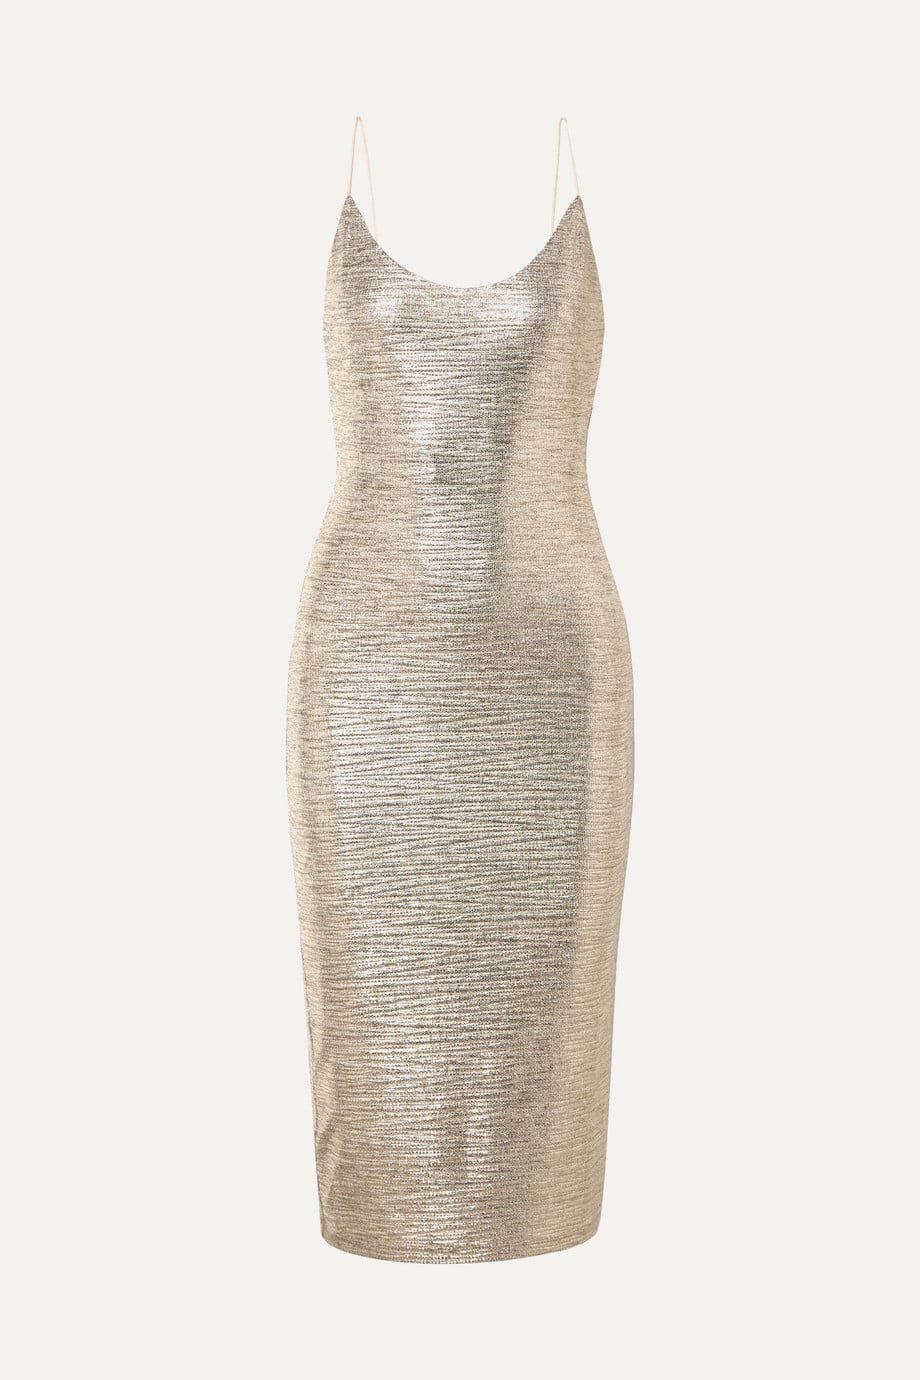 Alice + Olivia Delora Textured-Lamé Midi Dress, 25 Sexy Party Dresses for  Commanding the Attention at All Your Festive Events